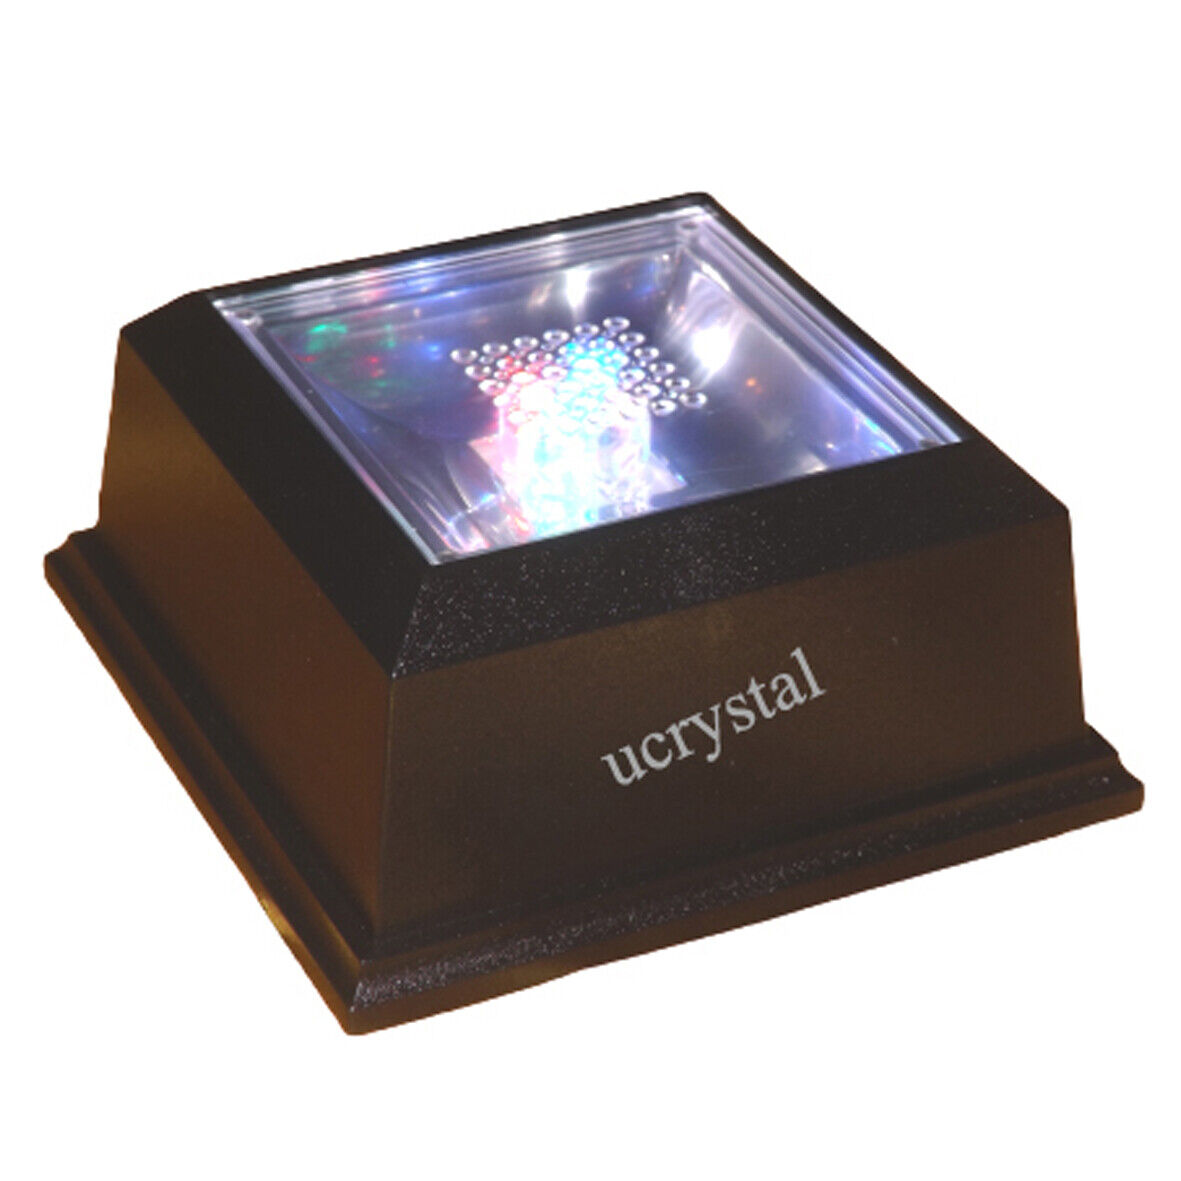 4 LED light base for 3D photo crystal engraved glass art lighted display stand